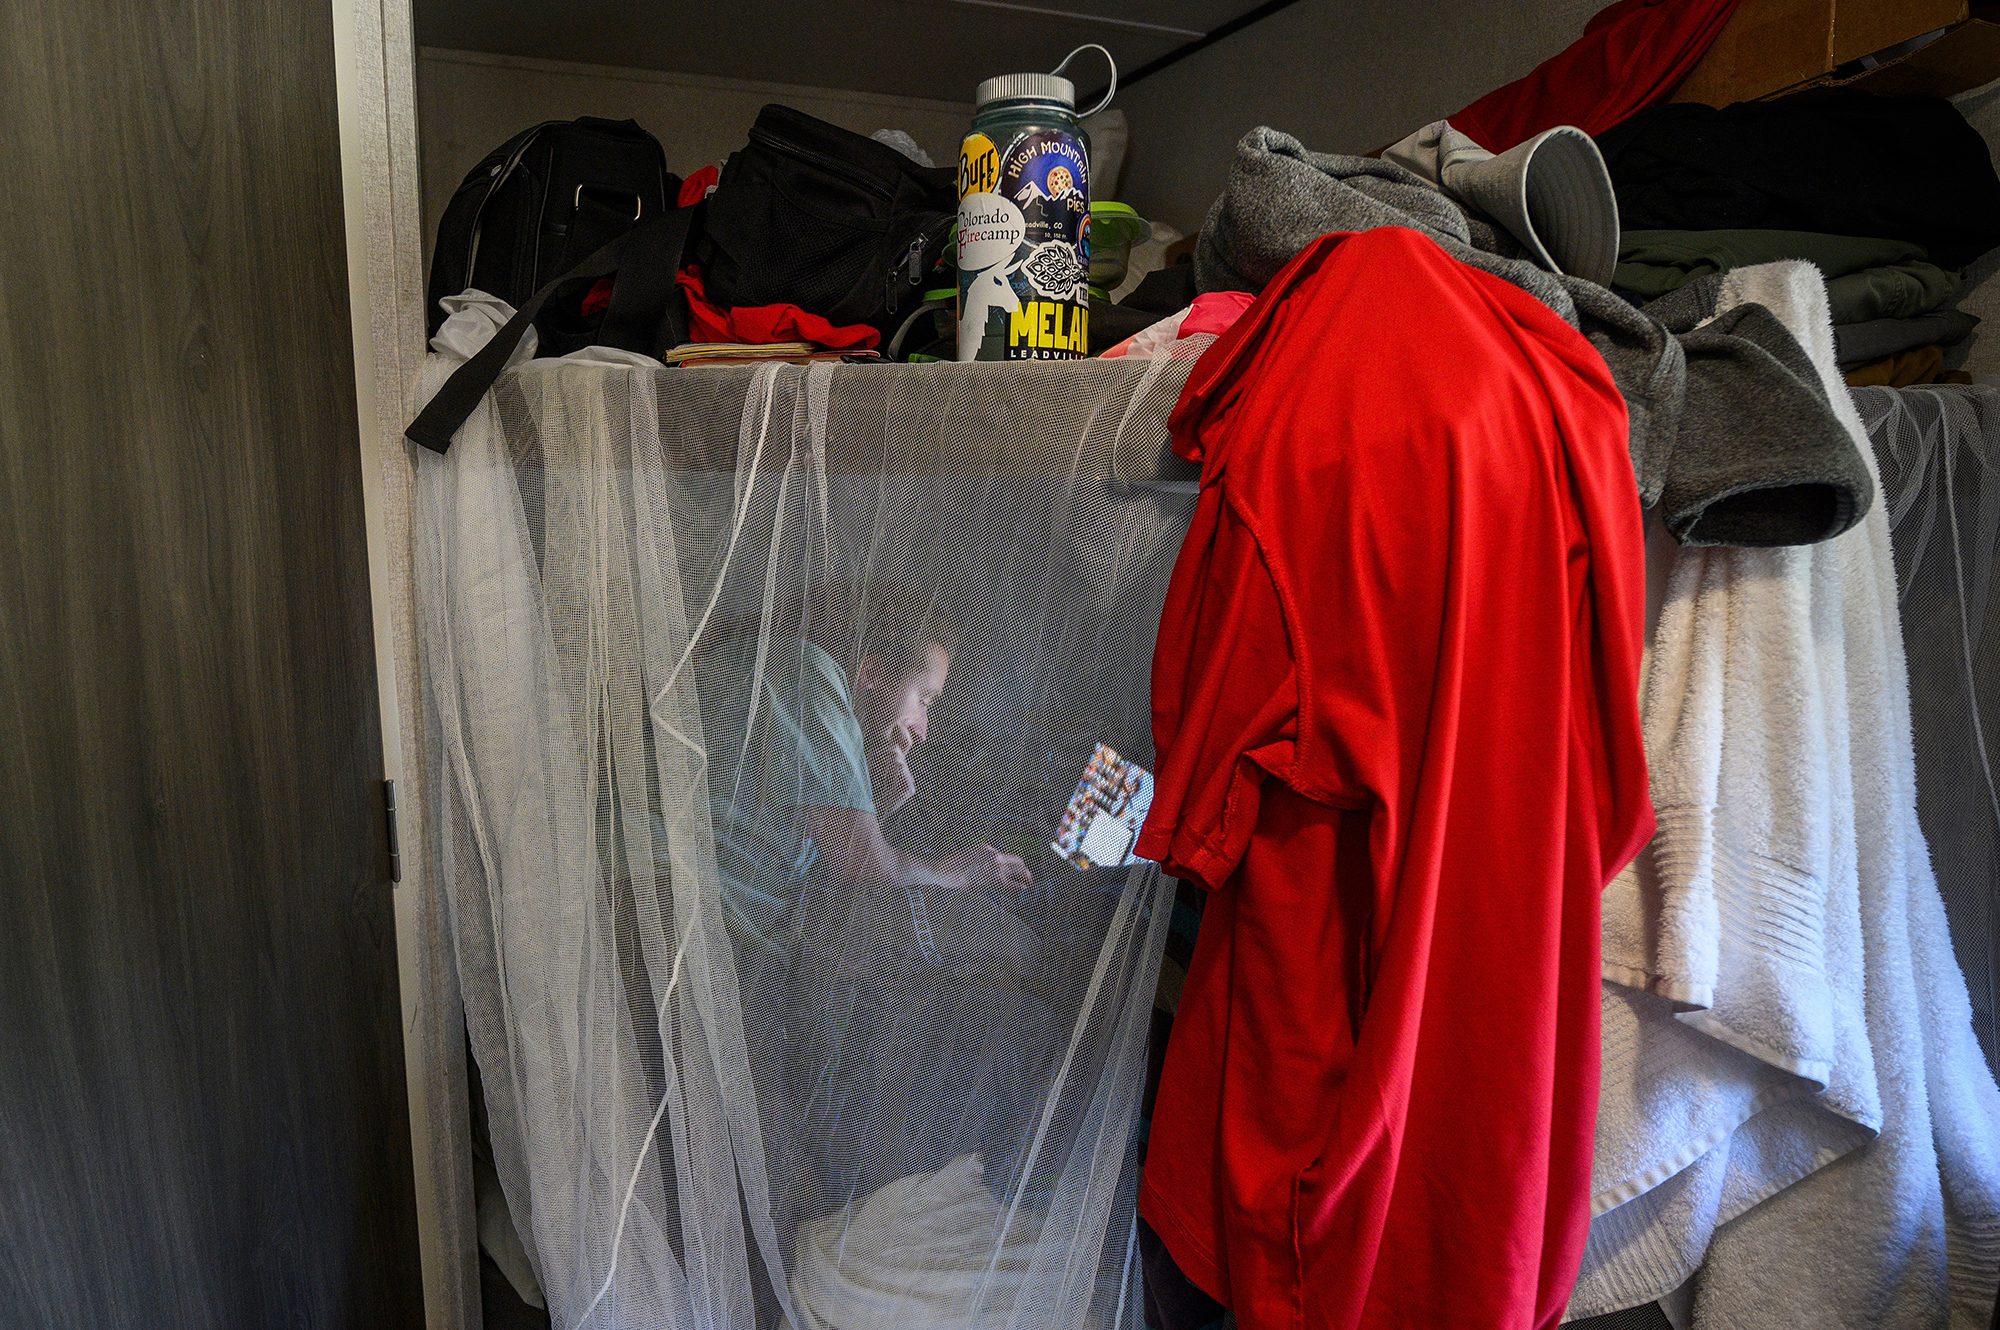 Inside the team's RV, Timon Keller sits in the bottom bunk bed behind a gauzy translucent mosquito net that is hang from the top bunk which also stores water bottles, clothes and other personal belongings. His face is illuminated by the light of his laptop screen in the otherwise dark lower bunk.